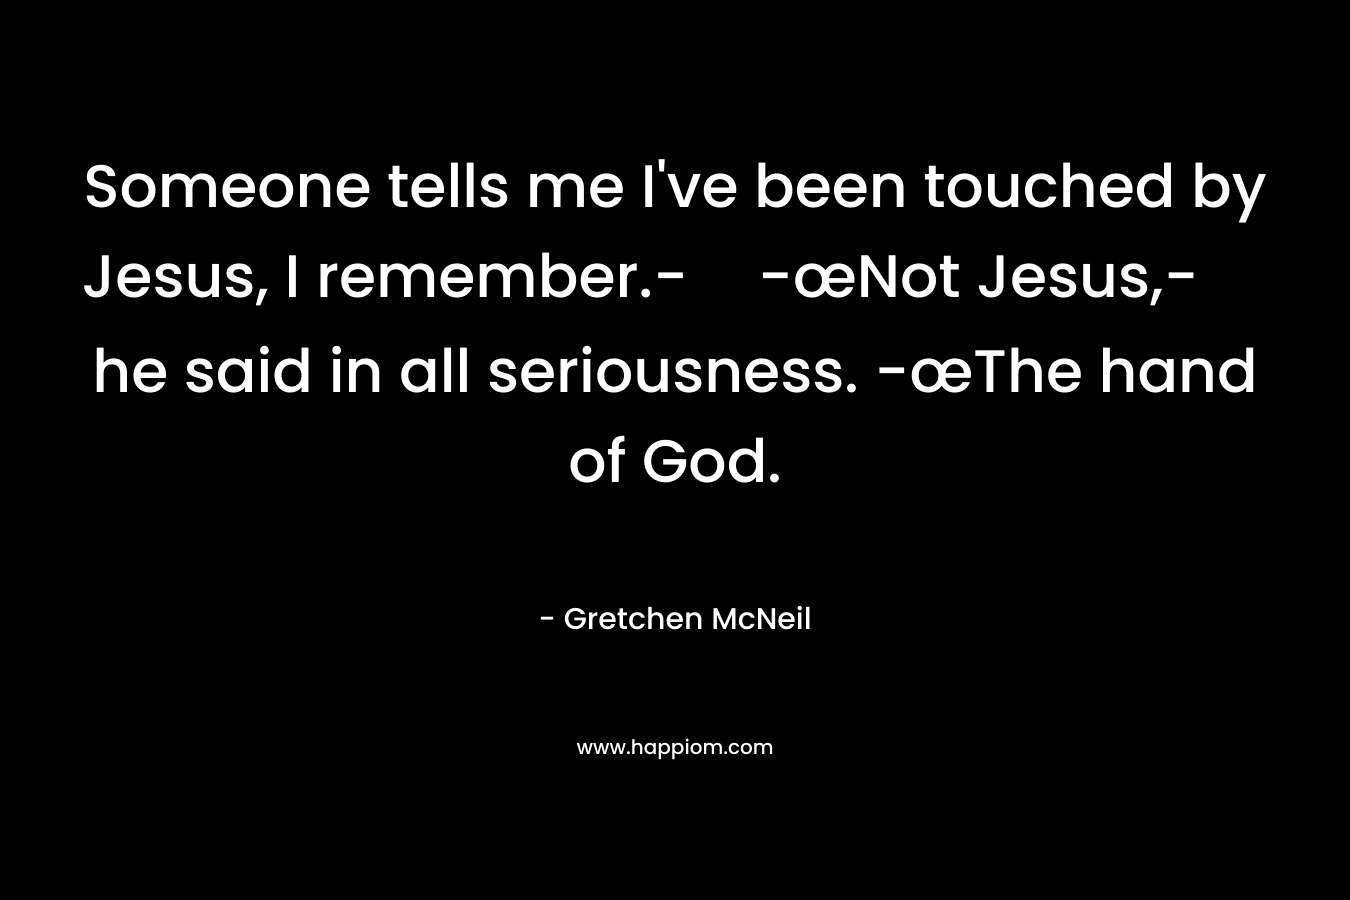 Someone tells me I’ve been touched by Jesus, I remember.--œNot Jesus,- he said in all seriousness. -œThe hand of God. – Gretchen McNeil